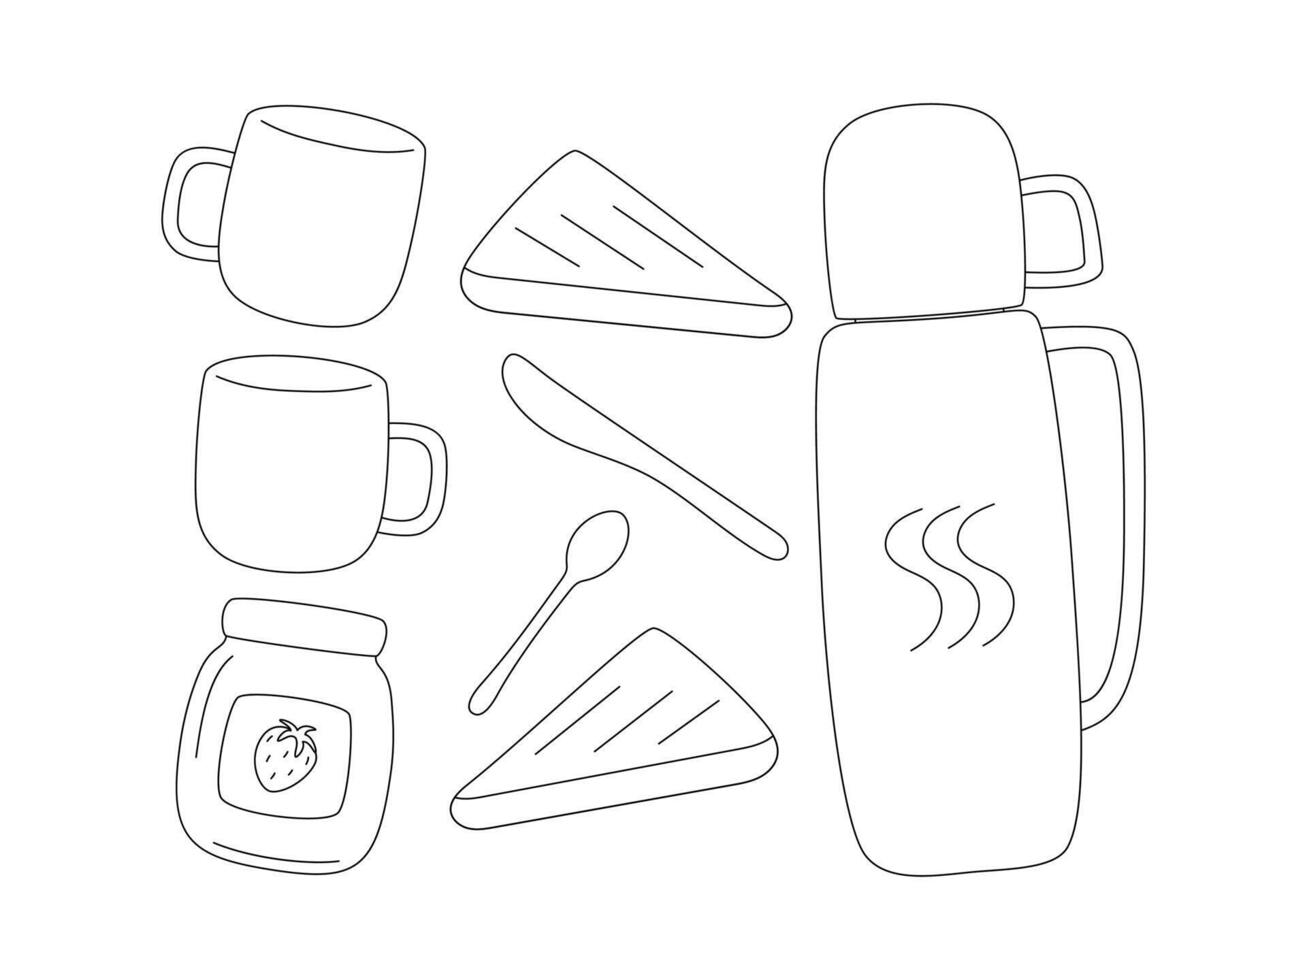 Outline vector elements for picnic, camping and hiking. Travel thermos with hot drink and mugs. Toast, slices of bread and jar of strawberry jam. Set of linear objects isolated on white background